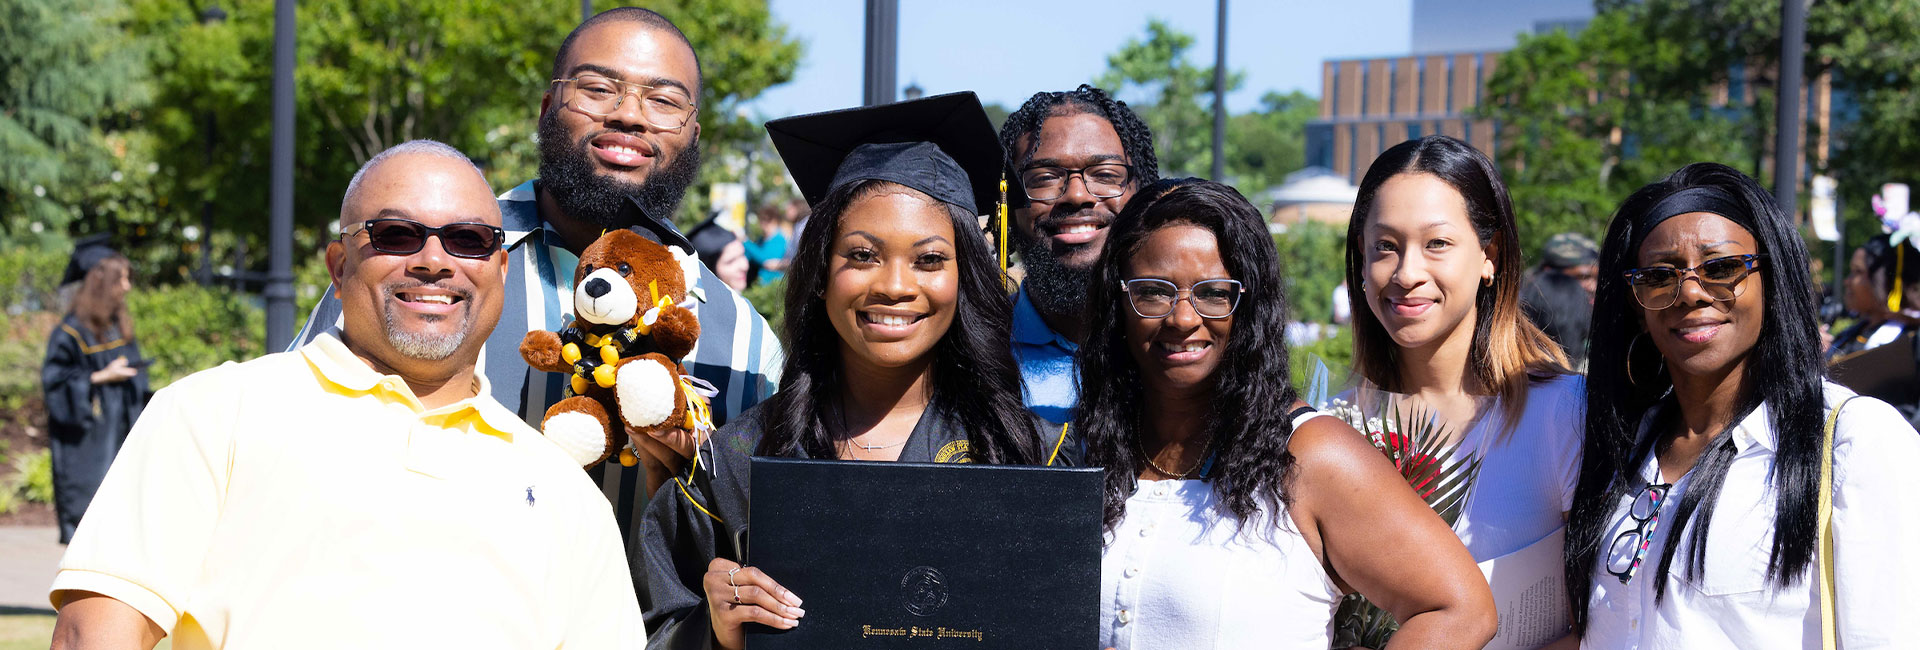 KSU graduate student with family and friends